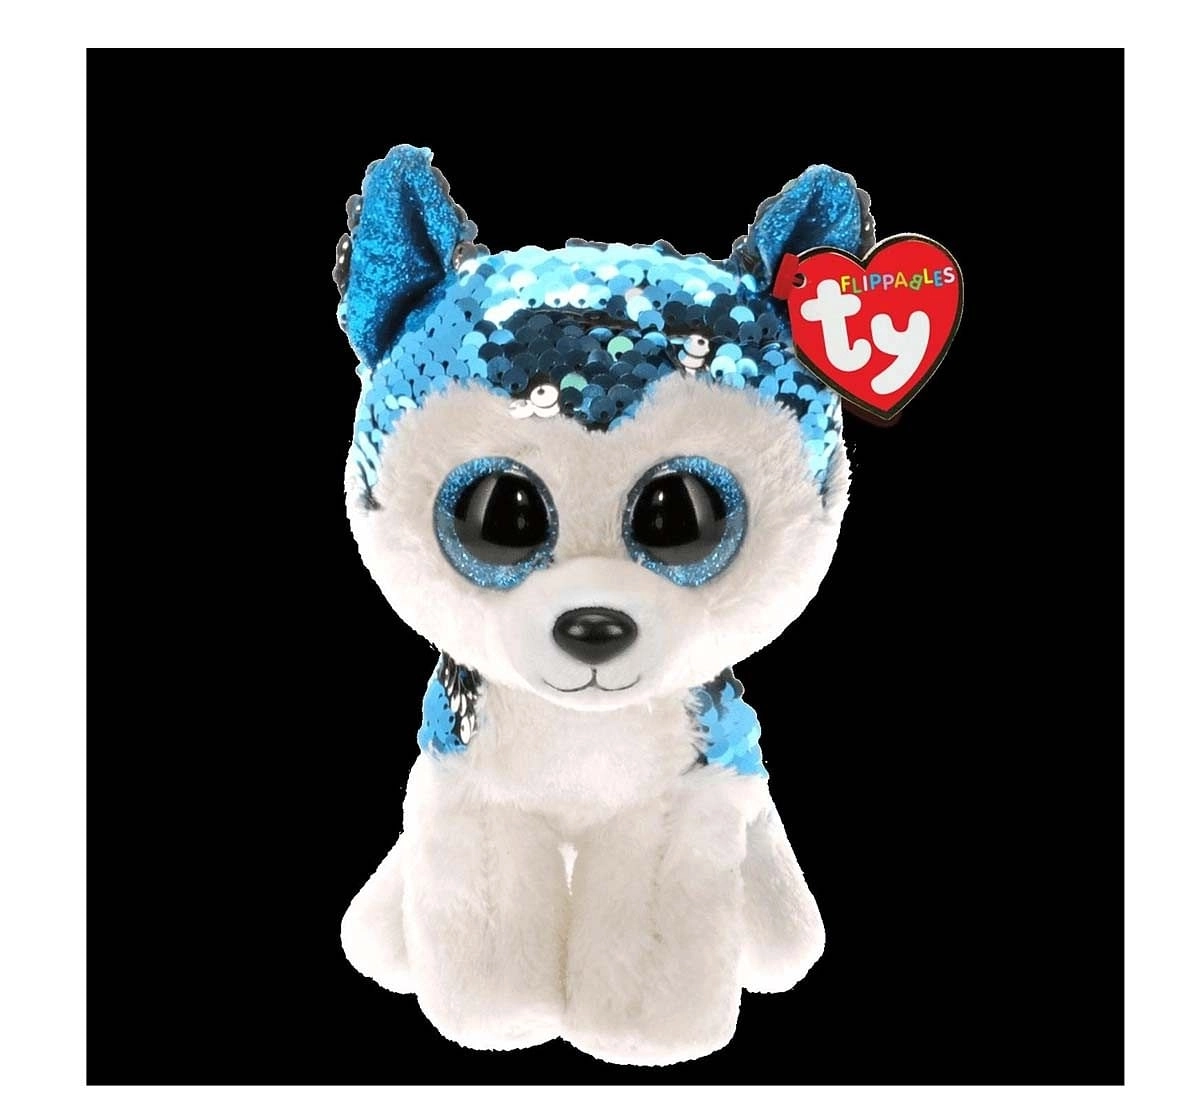 Ty Toys Slush - Husky Fllippables Regular Beanie Boo Quirky Soft Toys for Kids Age 3Y+ - 15 Cm